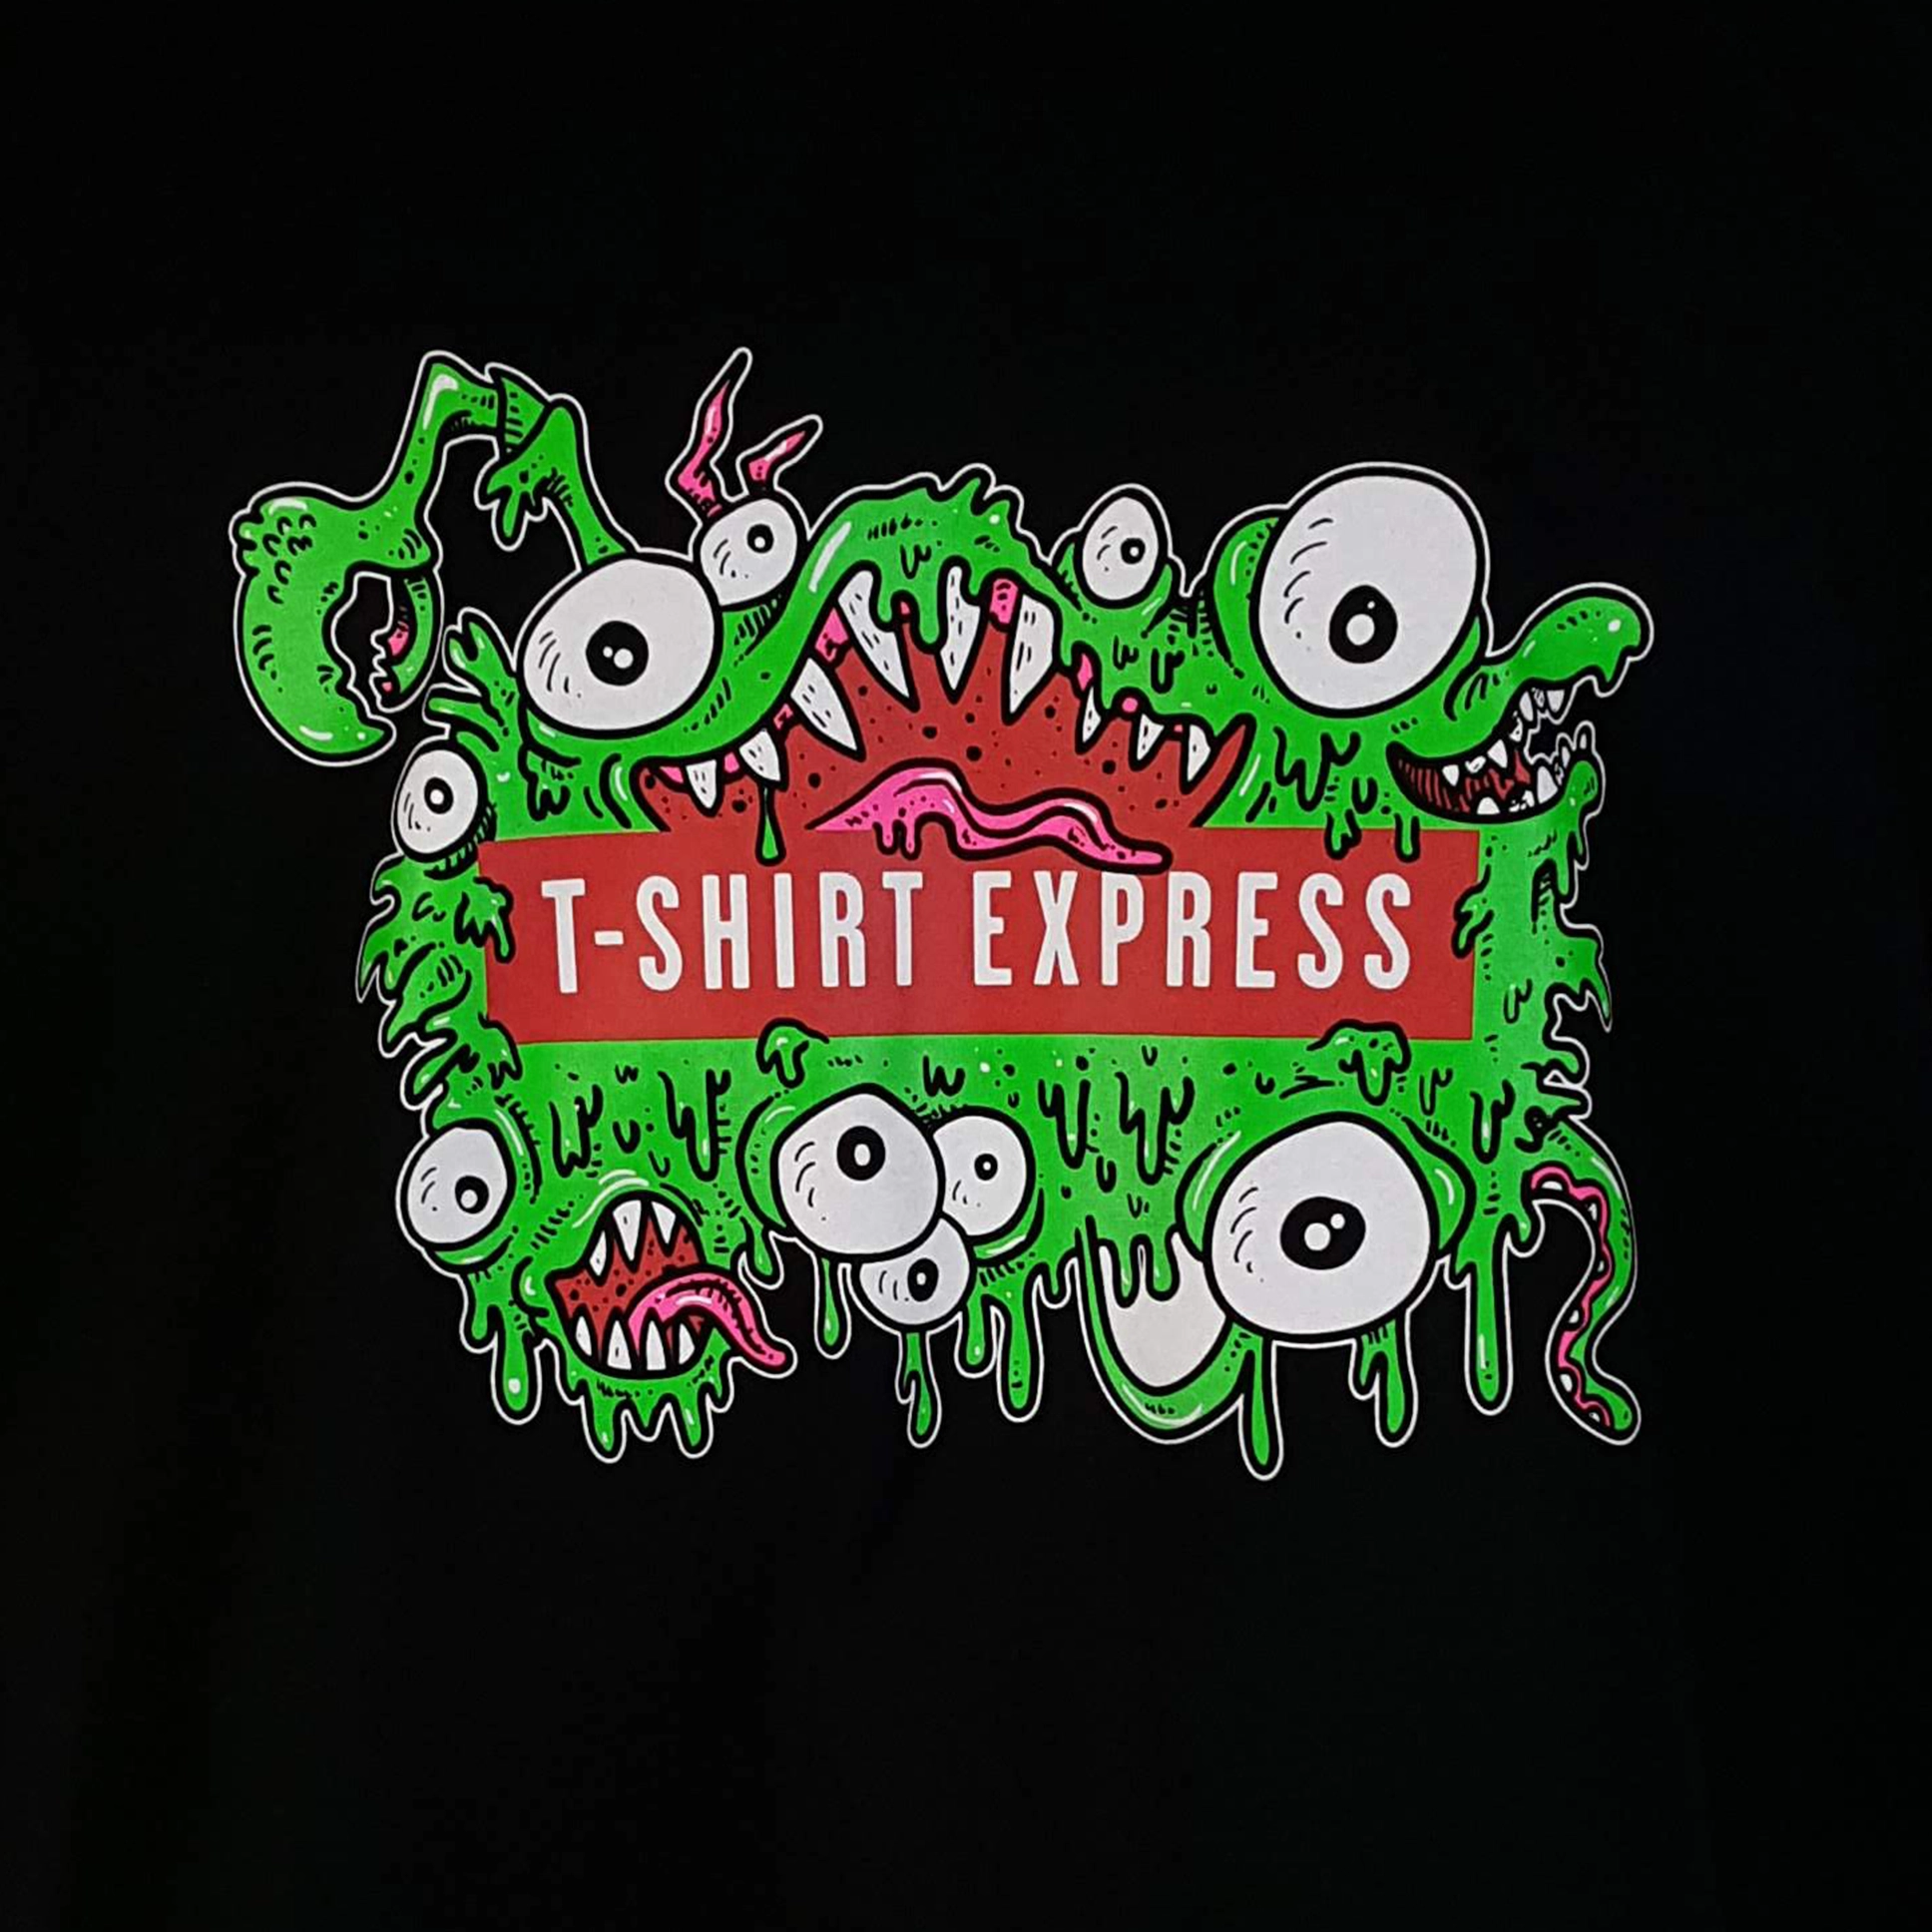 t-shirt express in Cannon ohio